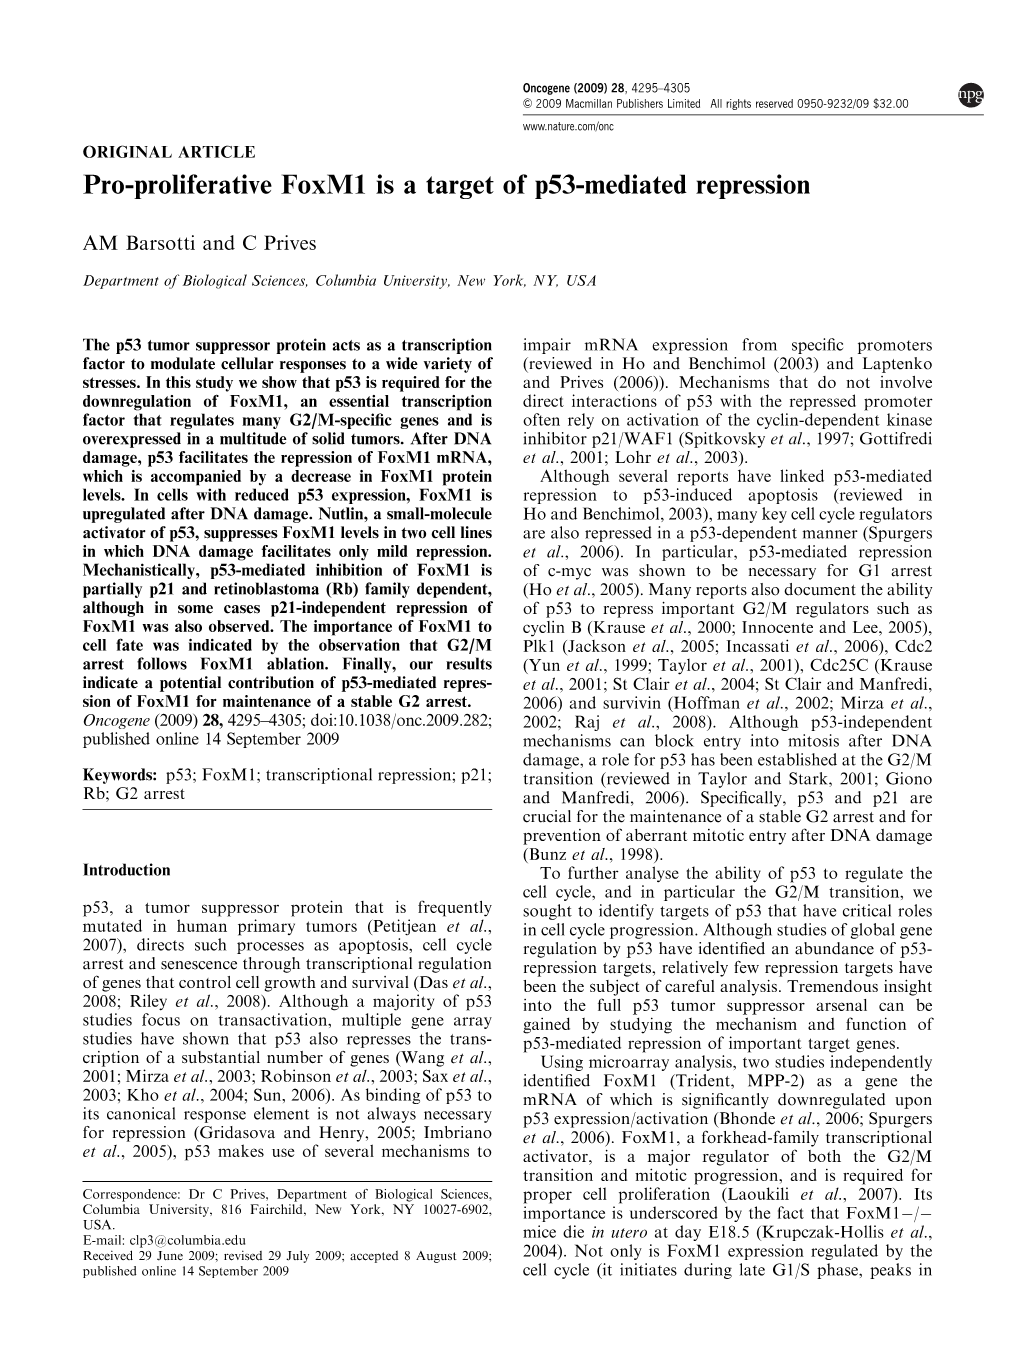 Pro-Proliferative Foxm1 Is a Target of P53-Mediated Repression